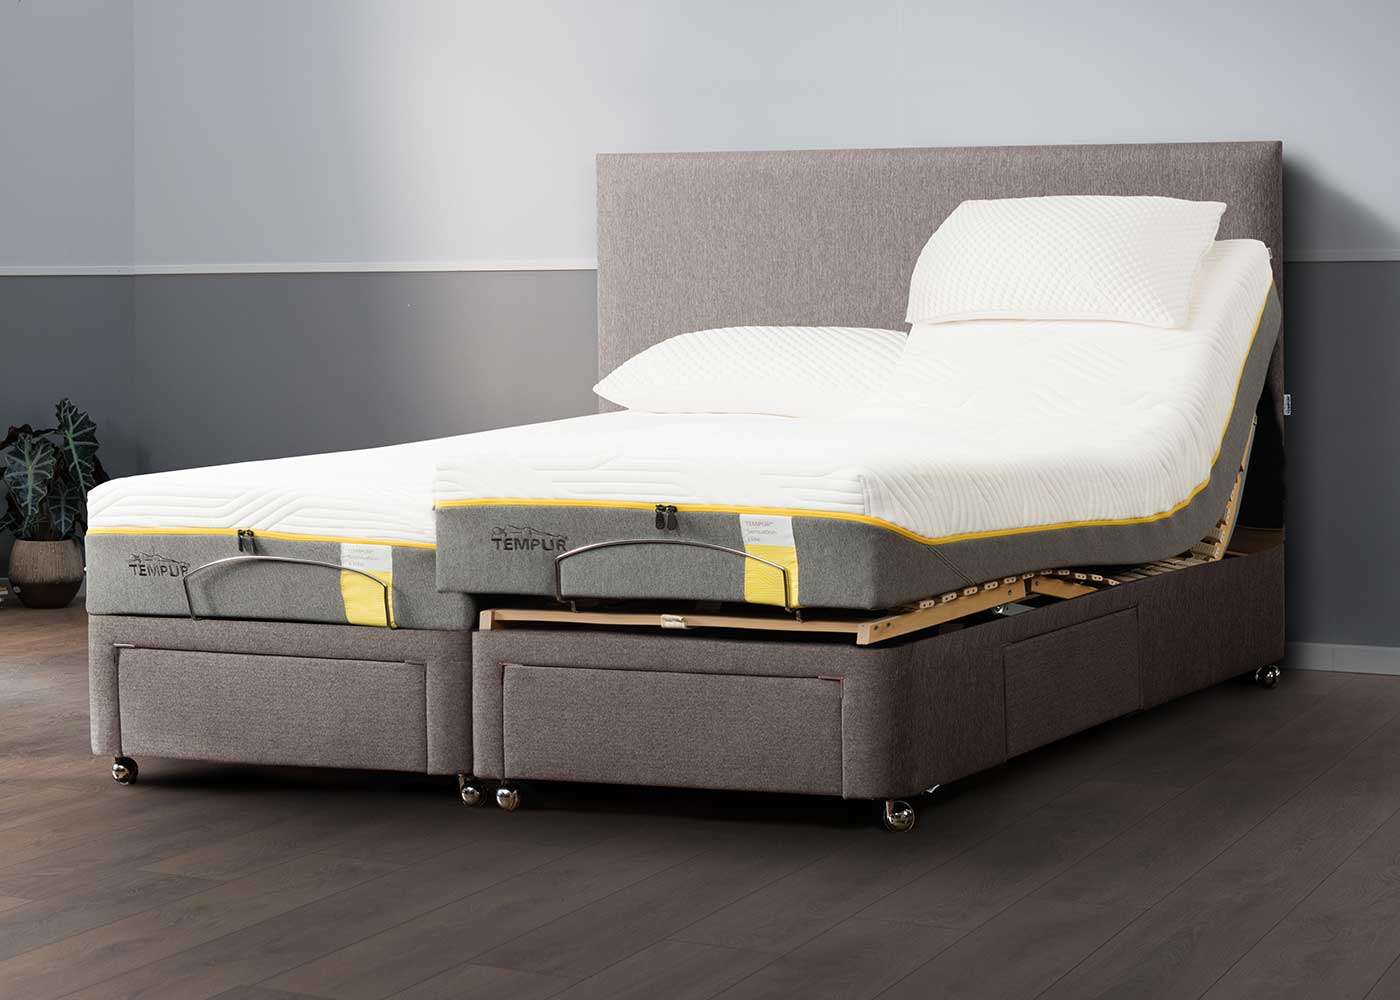 King Size Tempur Adjustable Bed, Headboard For King Size Adjustable Bed